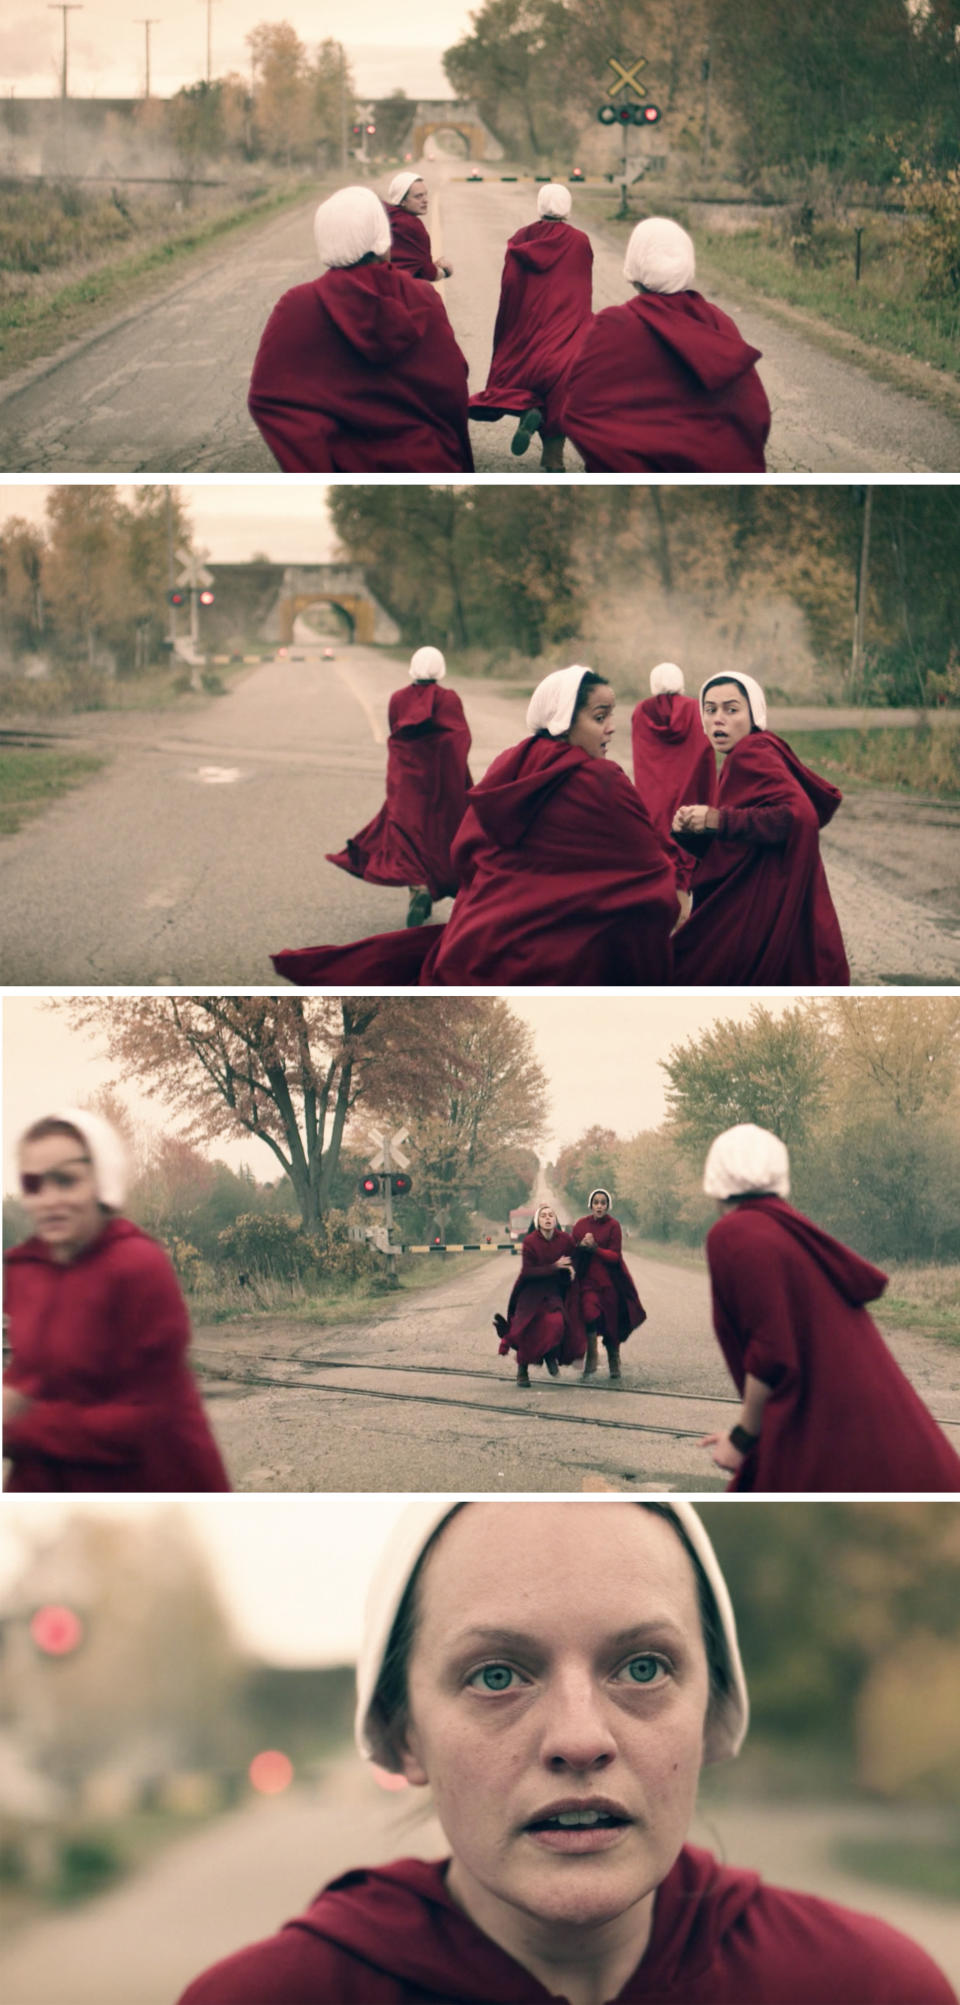 The Handmaid's running down a road towards the train tracks